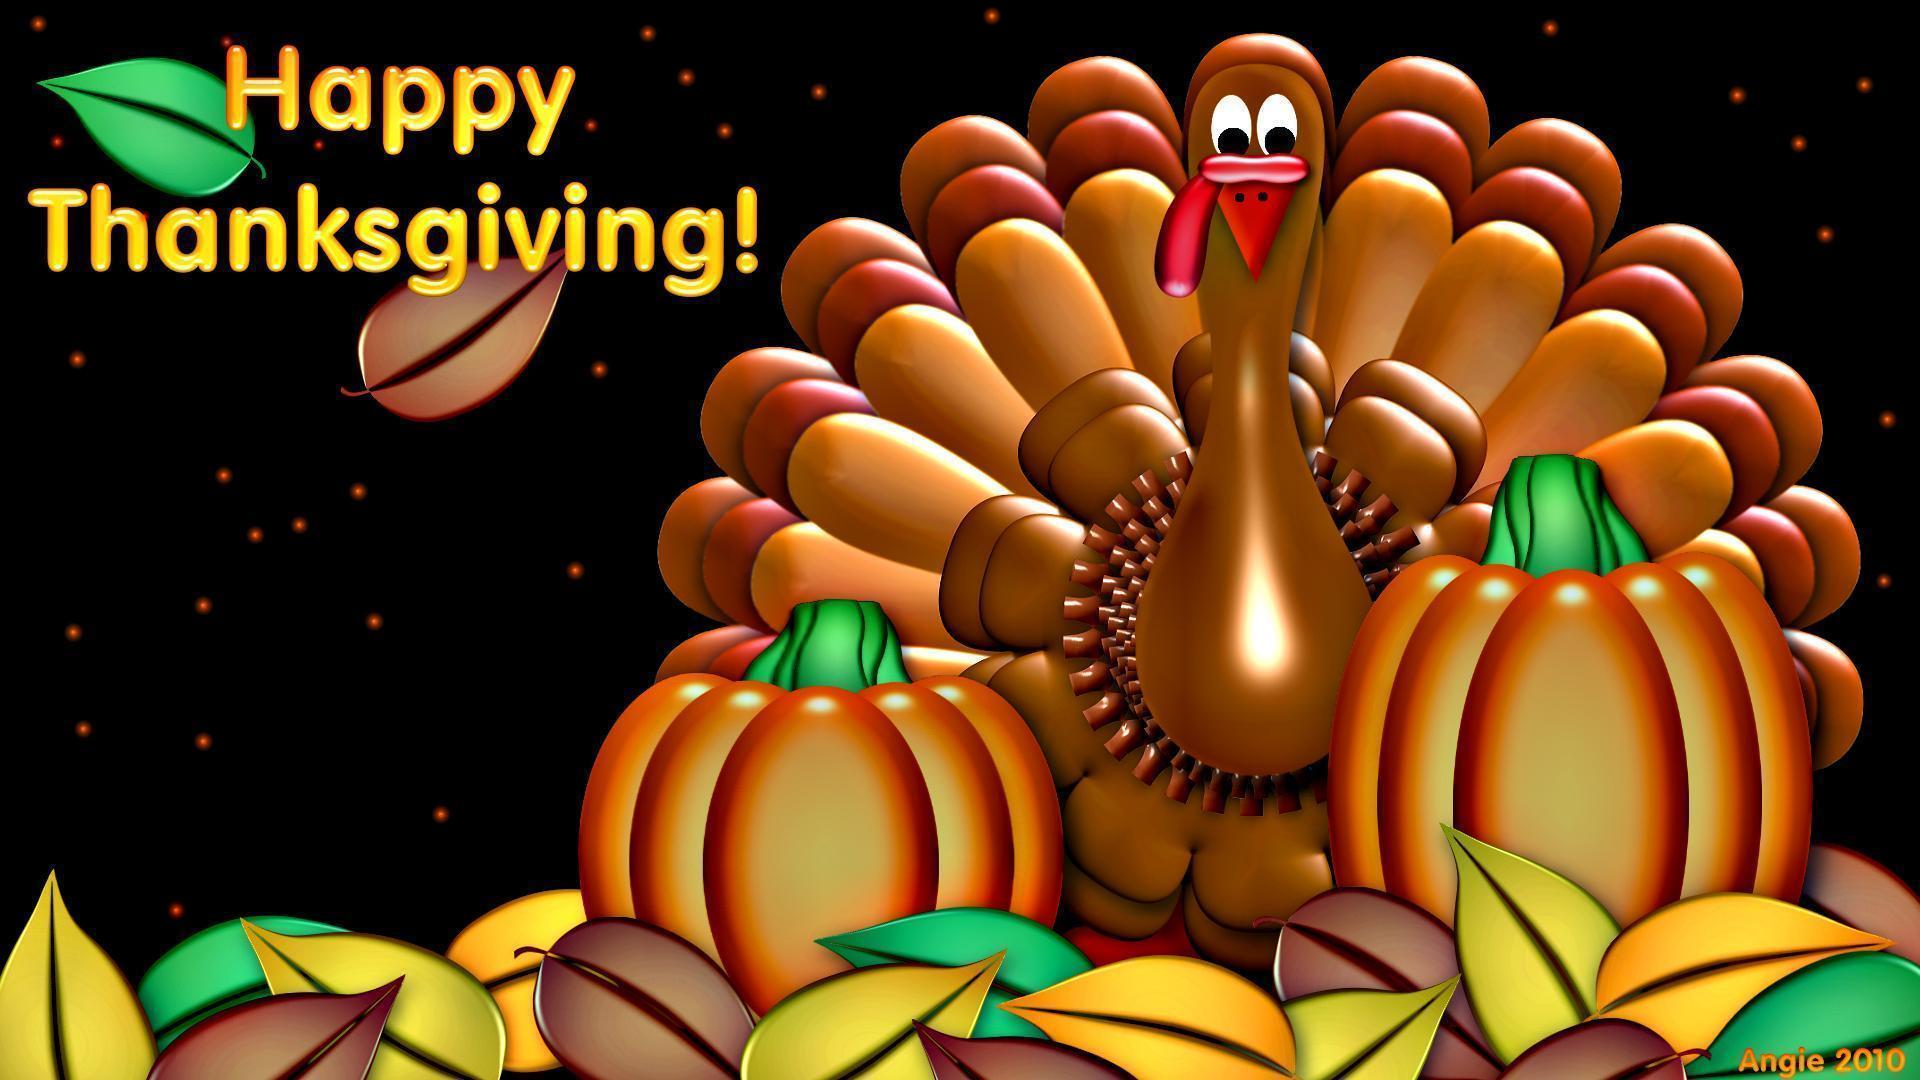 Happy Thanksgiving Picture, image, Pics, Photo, Wallpaper 2014